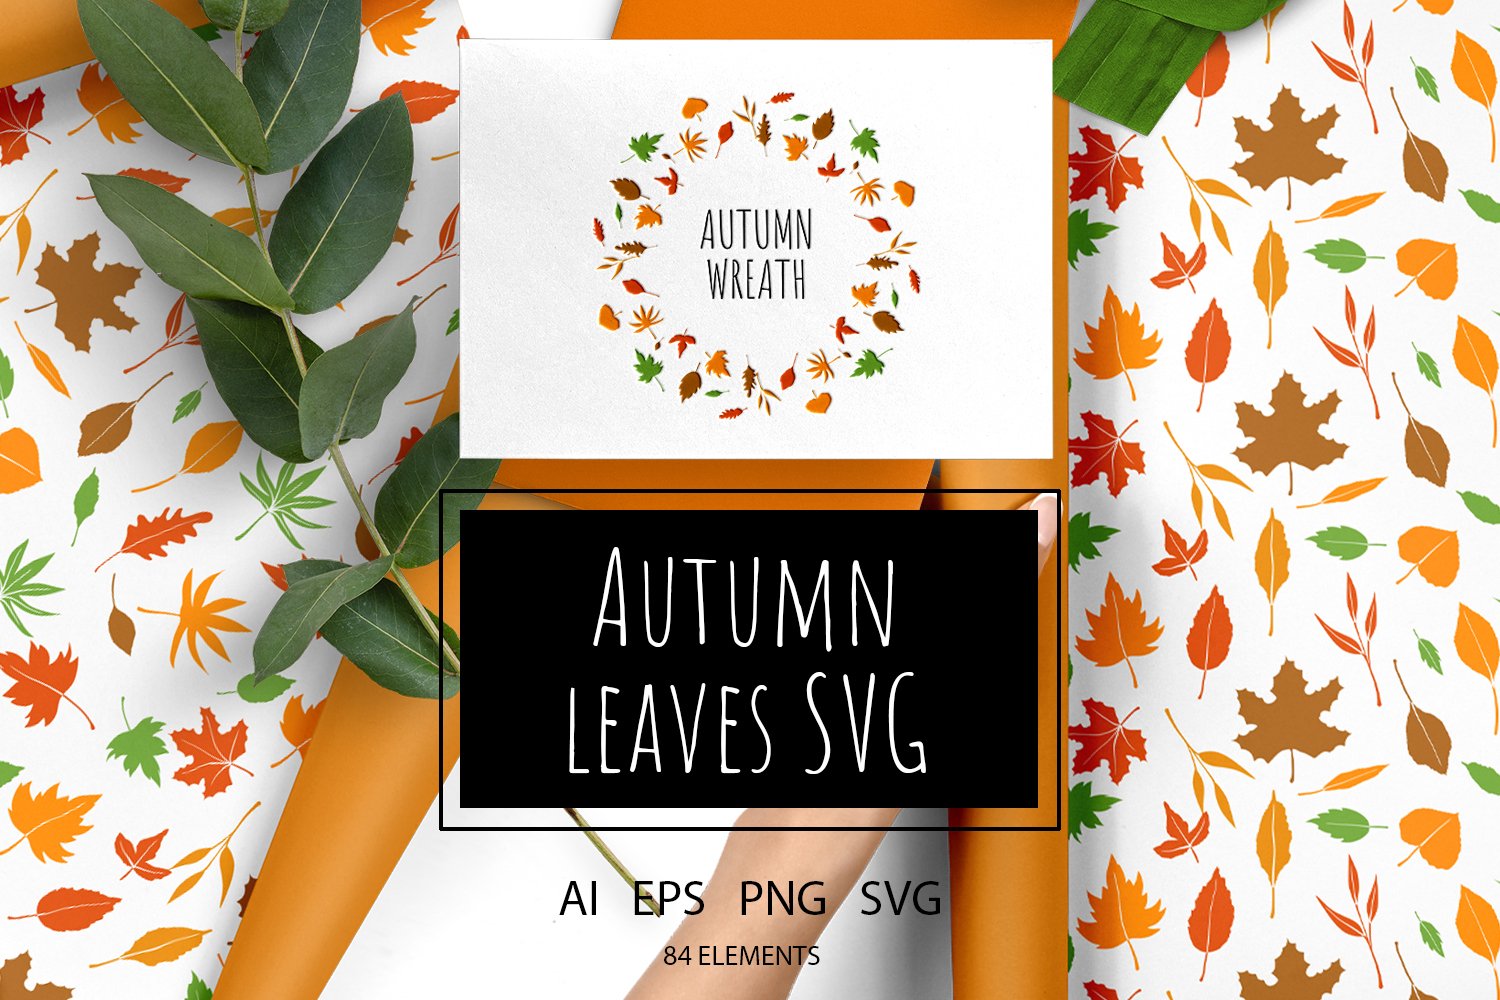 Cover image of Autumn Leaves SVG.